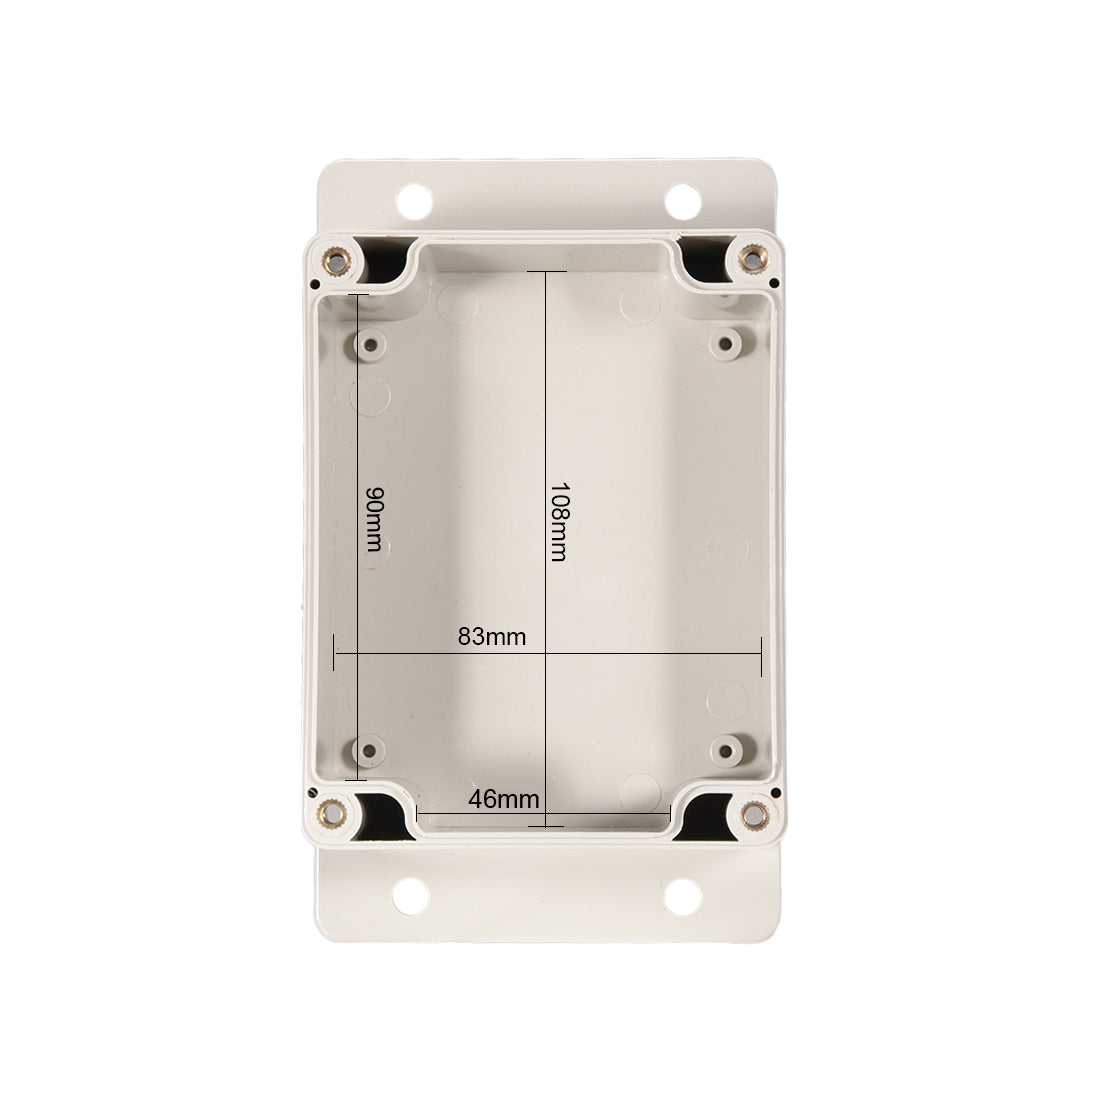 uxcell Uxcell 115mmx90mmx56mm(4.5"x3.5"x2.2") ABS Junction Box Universal Project Enclosure w PC Transparent Cover